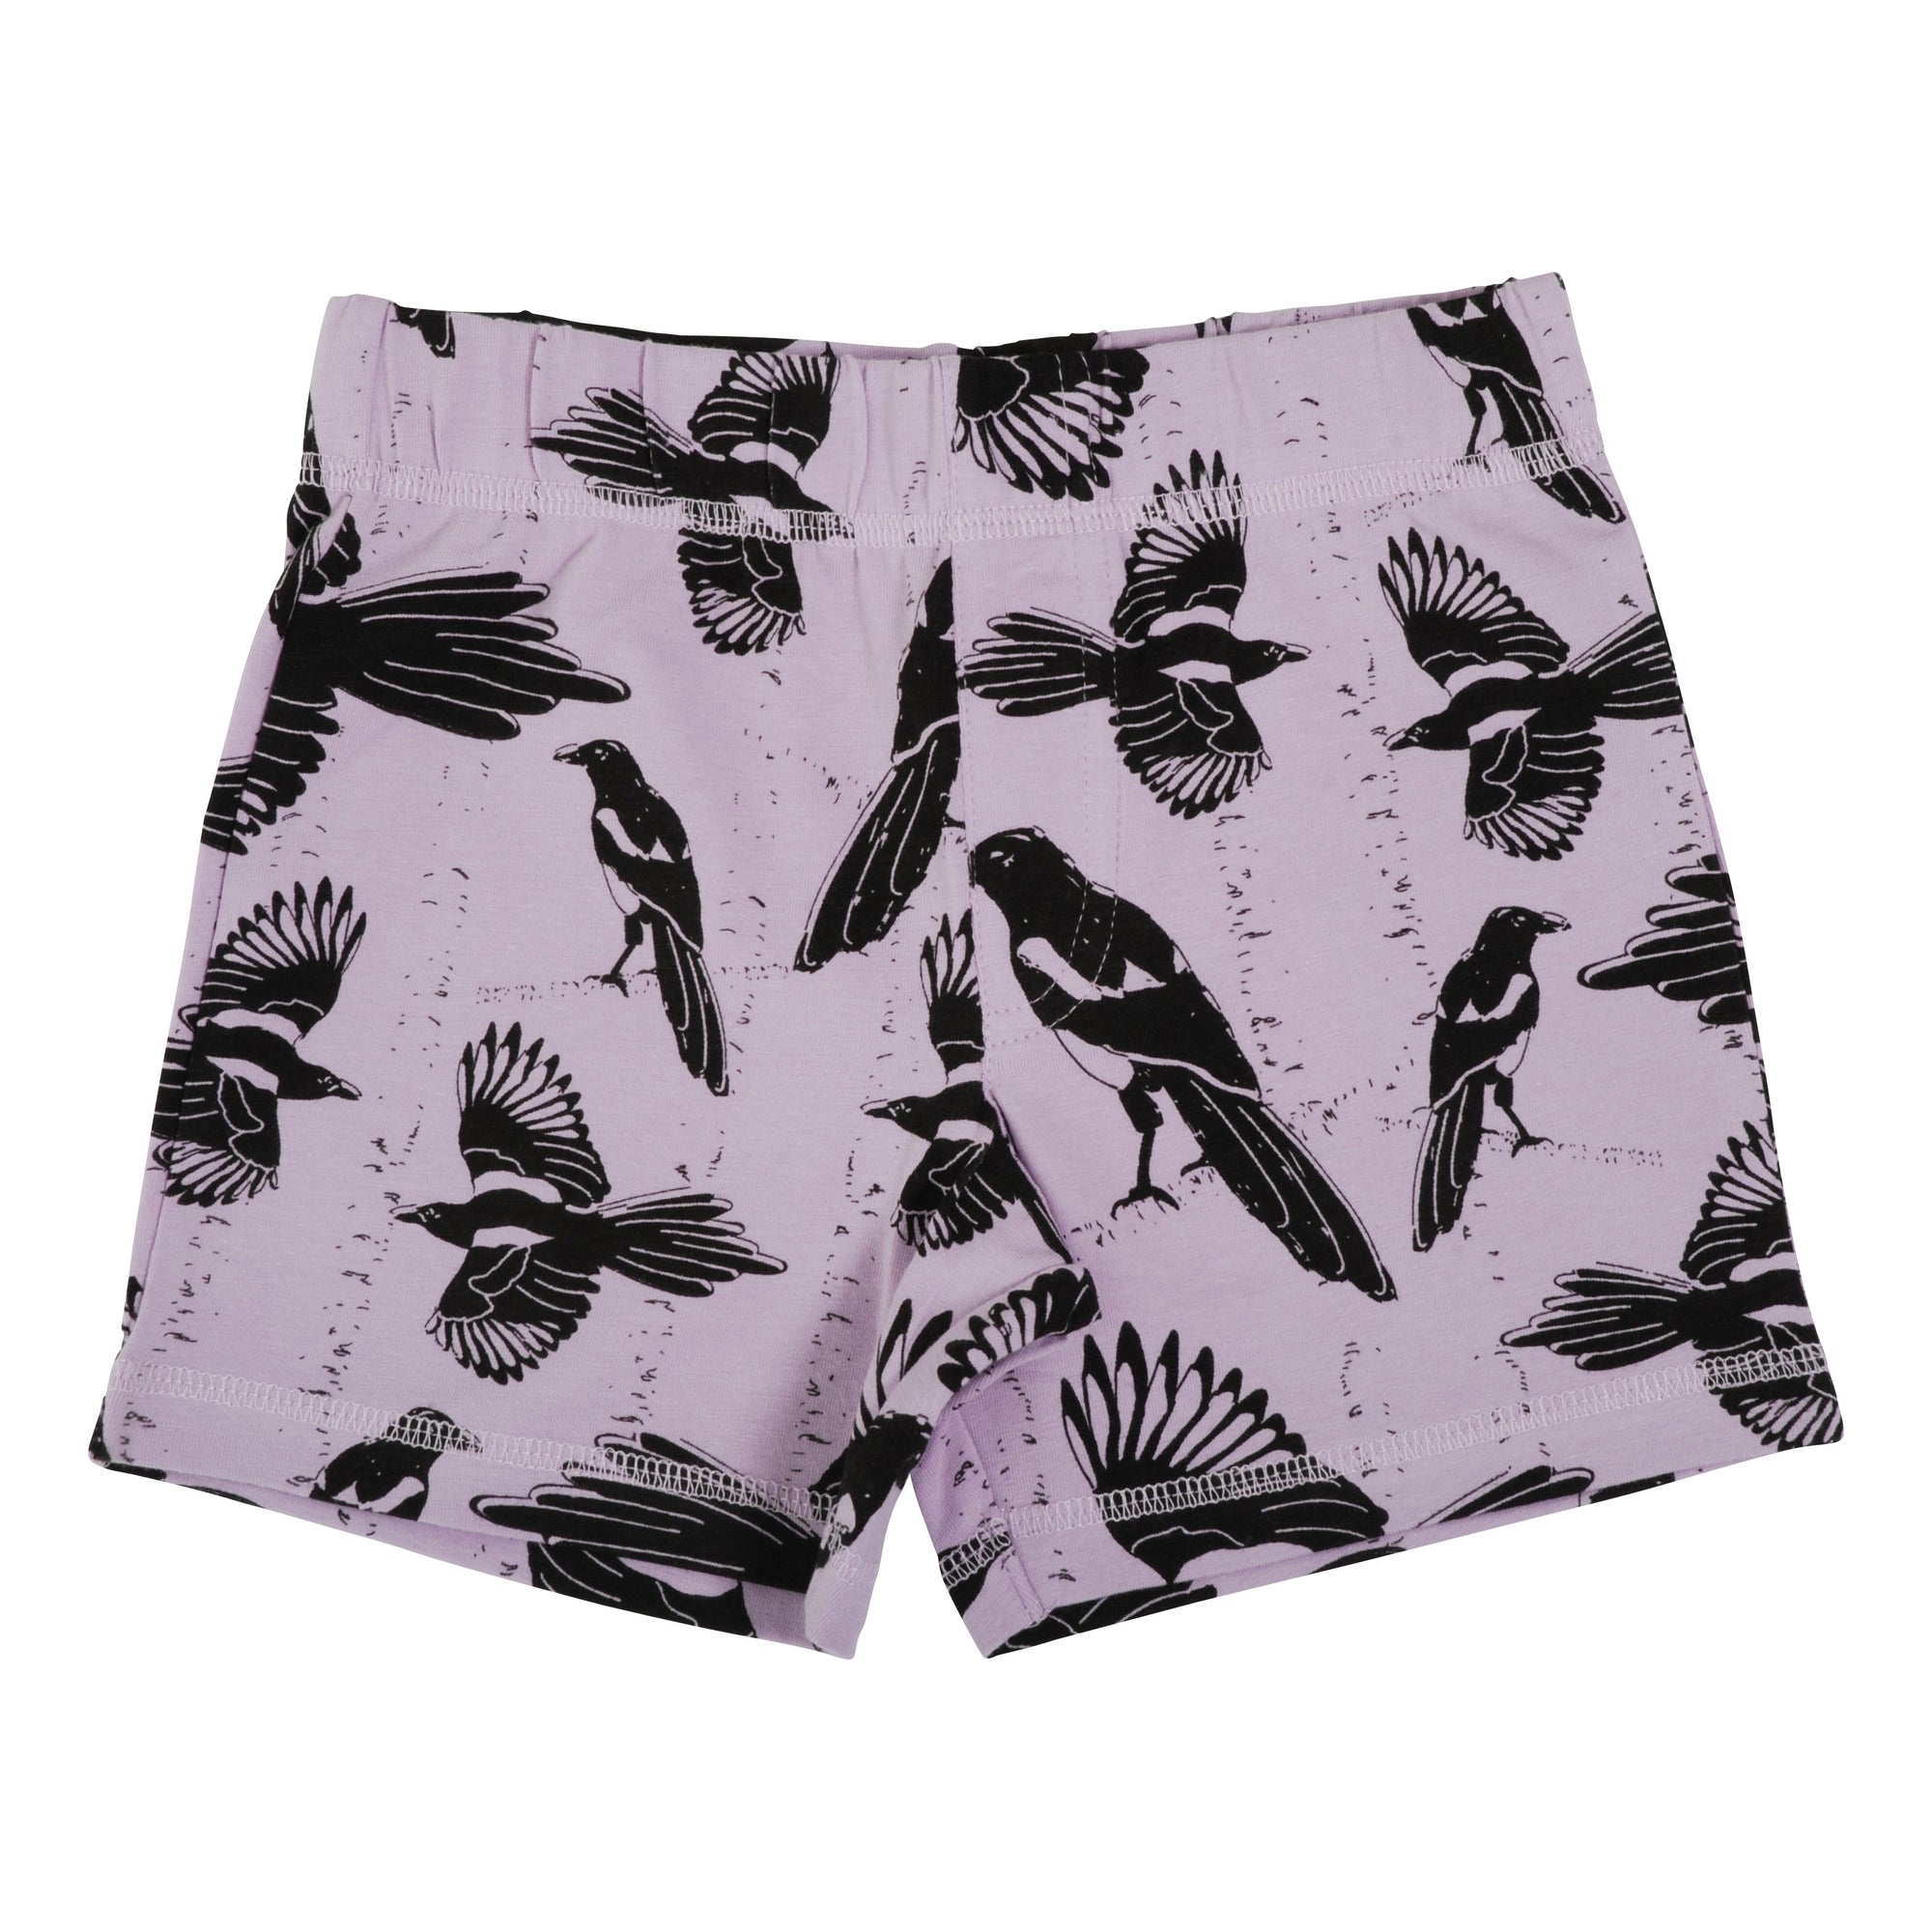 Pica Orchid Bloom Shorts - 1 Left Size 6-12 months-More Than A Fling-Modern Rascals